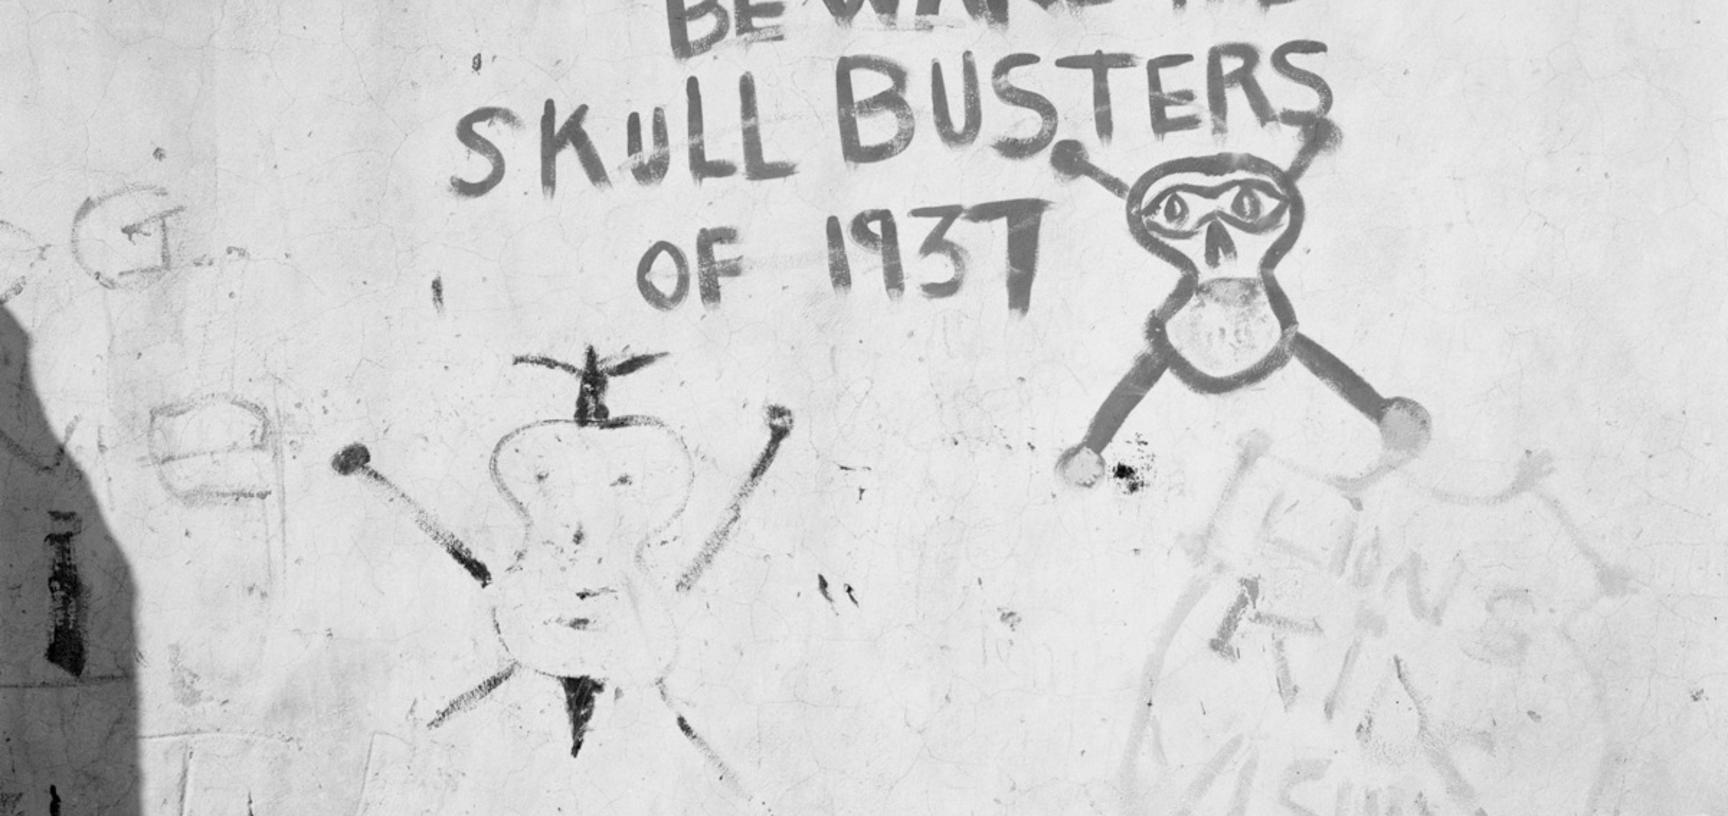 Skull Busters. Bo-Kaap, Cape Town, South Africa. Photograph by Bryan Heseltine. Circa 1949–1952. (Copyright Bryan Heseltine)